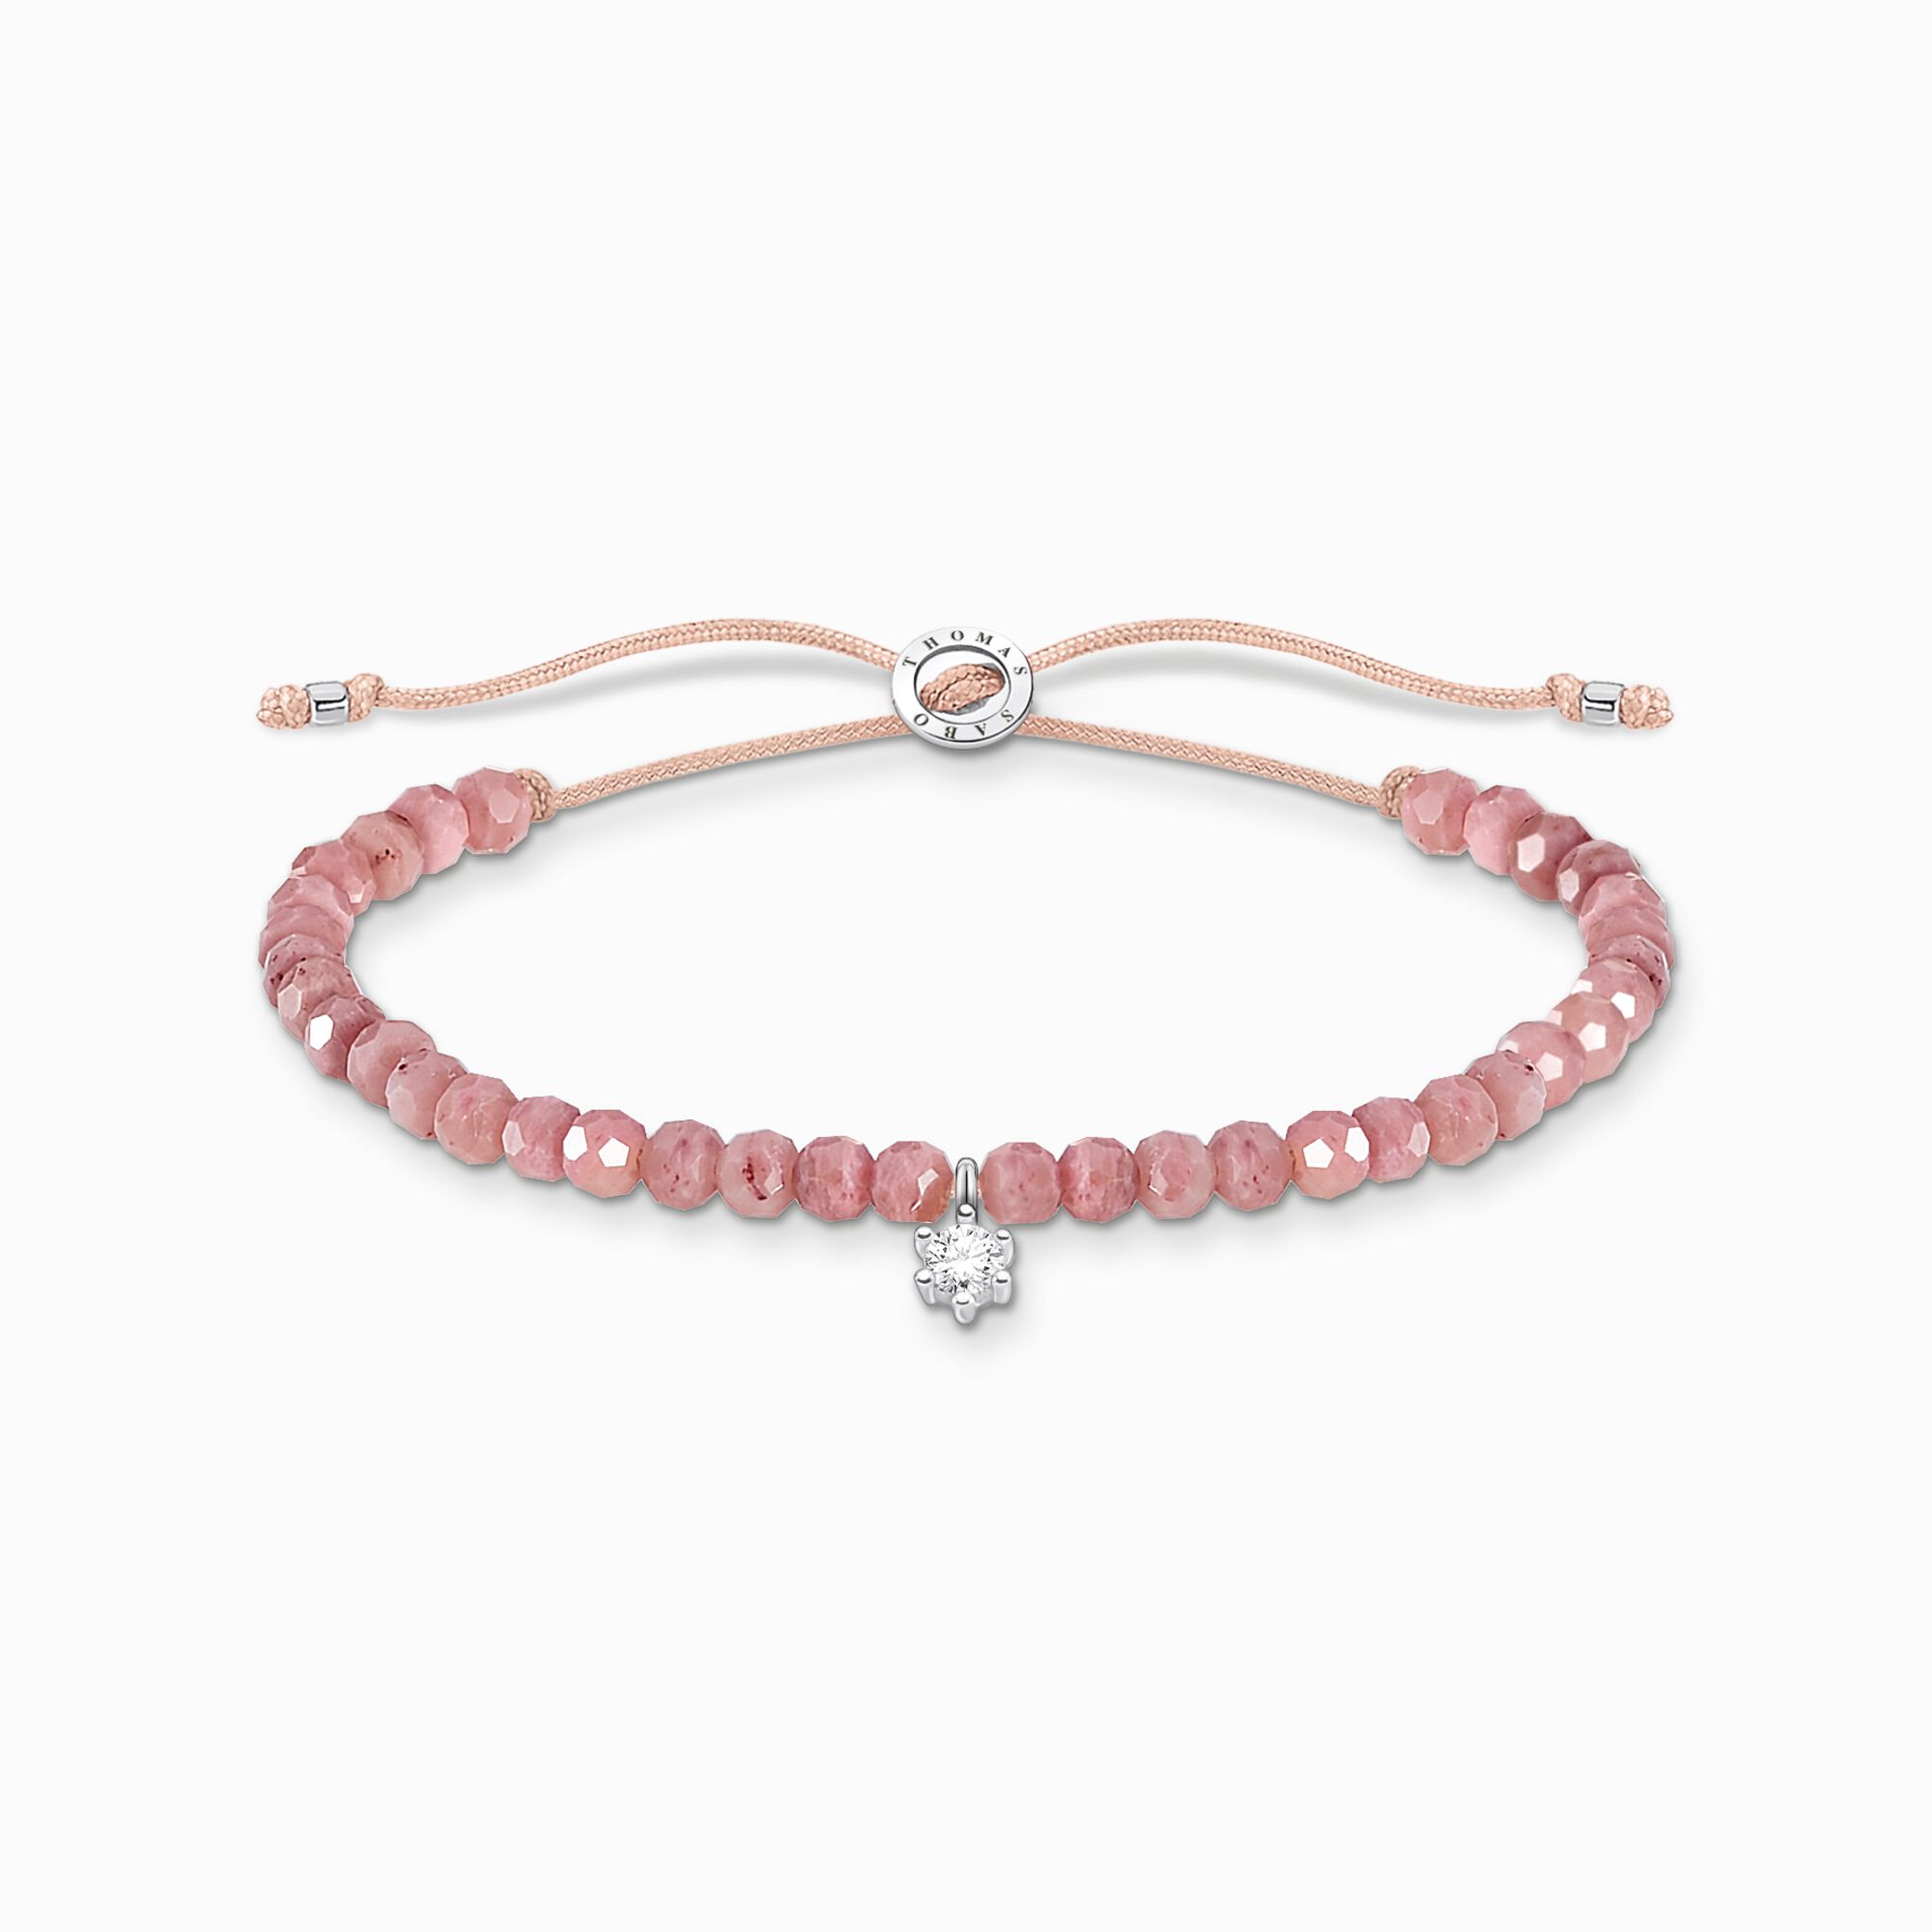 Bracelet pink pearls with white stone from the Charming Collection collection in the THOMAS SABO online store